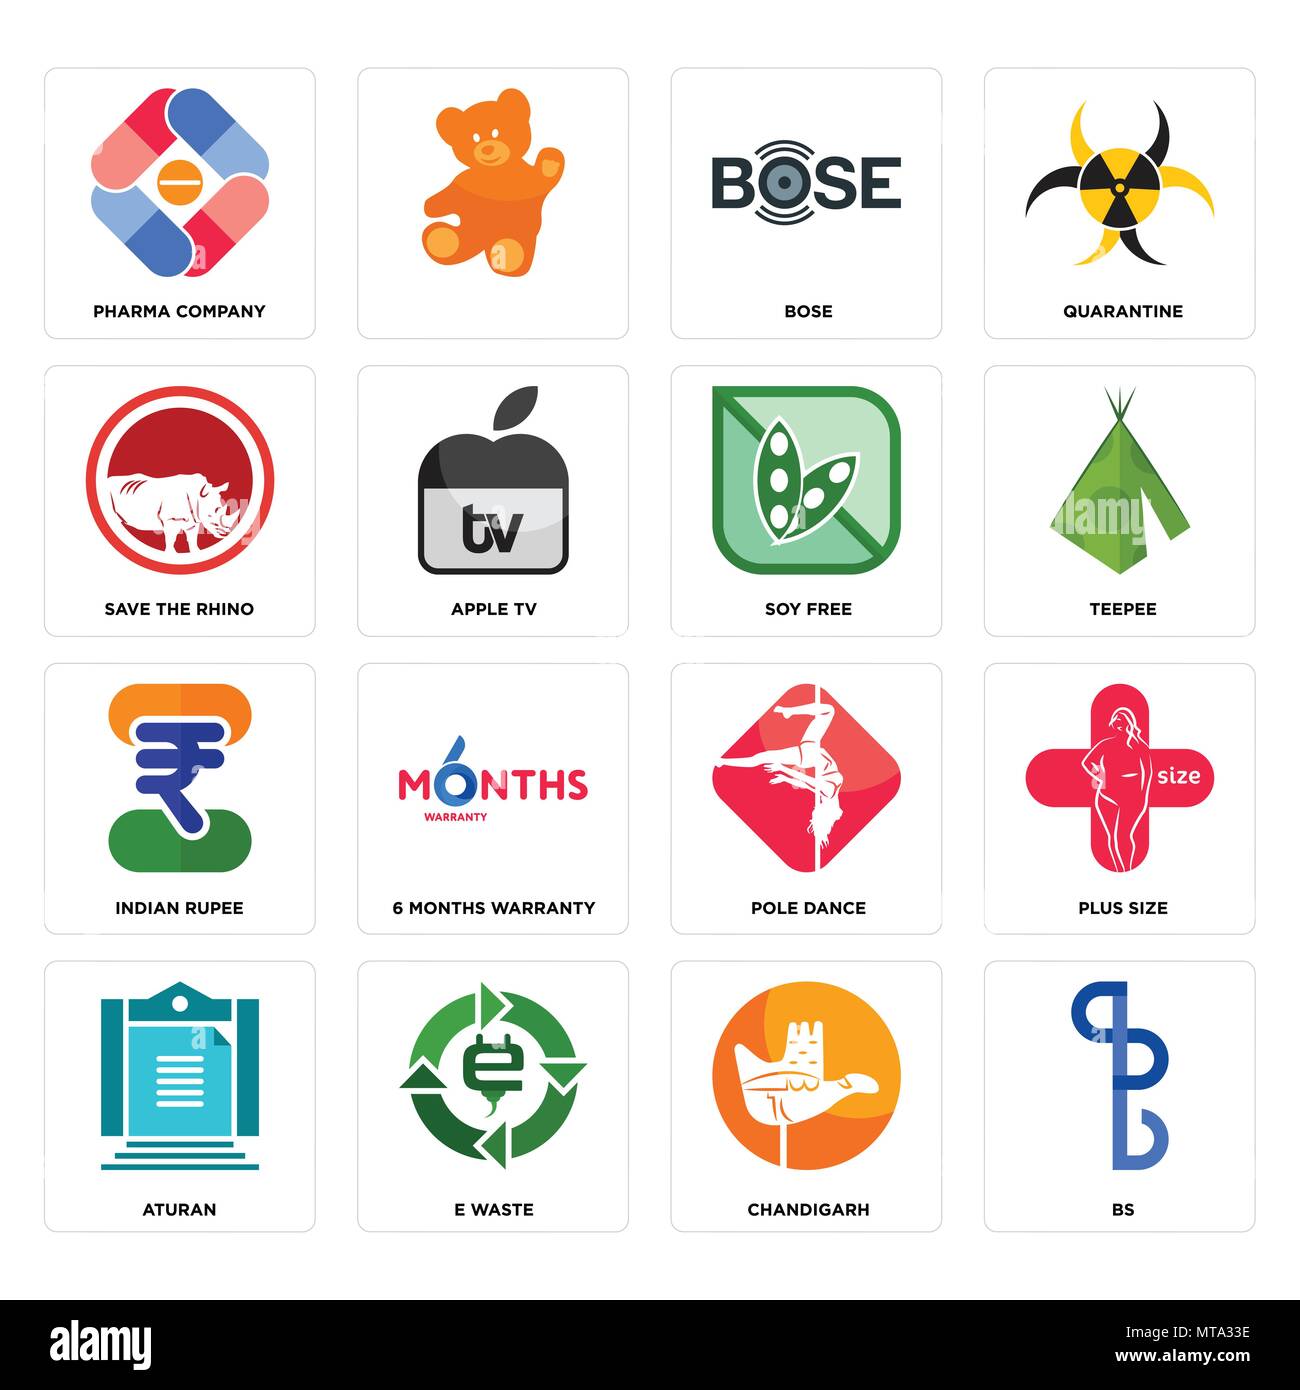 Set Of 16 simple editable icons such as bs, chandigarh, e waste, aturan, plus size, pharma company, save the rhino, indian rupee, soy free can be used Stock Vector